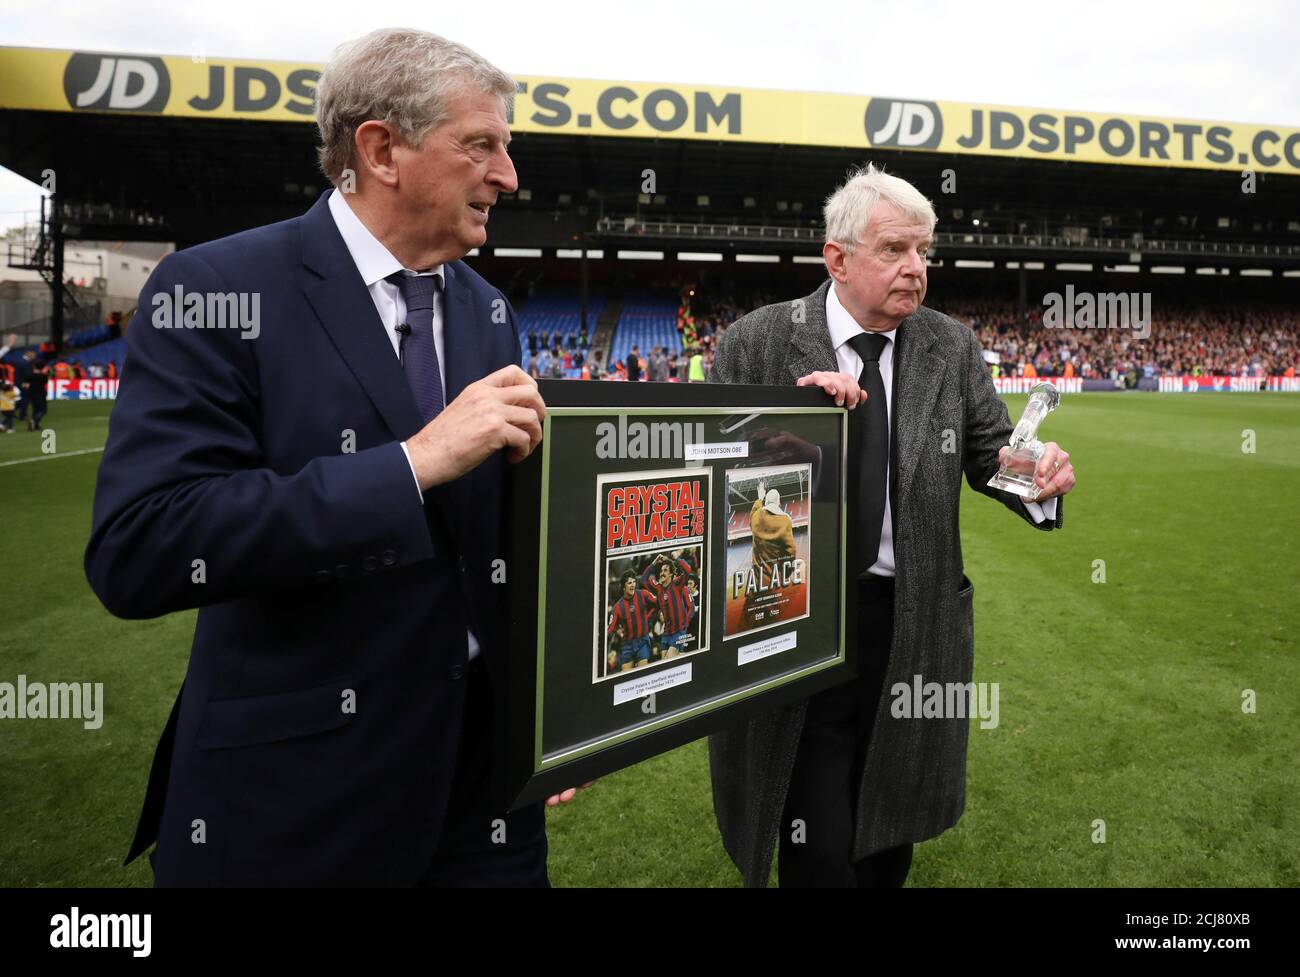 Soccer Football - Premier League - Crystal Palace vs West Bromwich Albion - Selhurst Park, London, Britain - May 13, 2018   Crystal Palace manager Roy Hodgson presents an award to commentator John Motson after the match   REUTERS/Hannah McKay    EDITORIAL USE ONLY. No use with unauthorized audio, video, data, fixture lists, club/league logos or 'live' services. Online in-match use limited to 75 images, no video emulation. No use in betting, games or single club/league/player publications.  Please contact your account representative for further details. Stock Photo